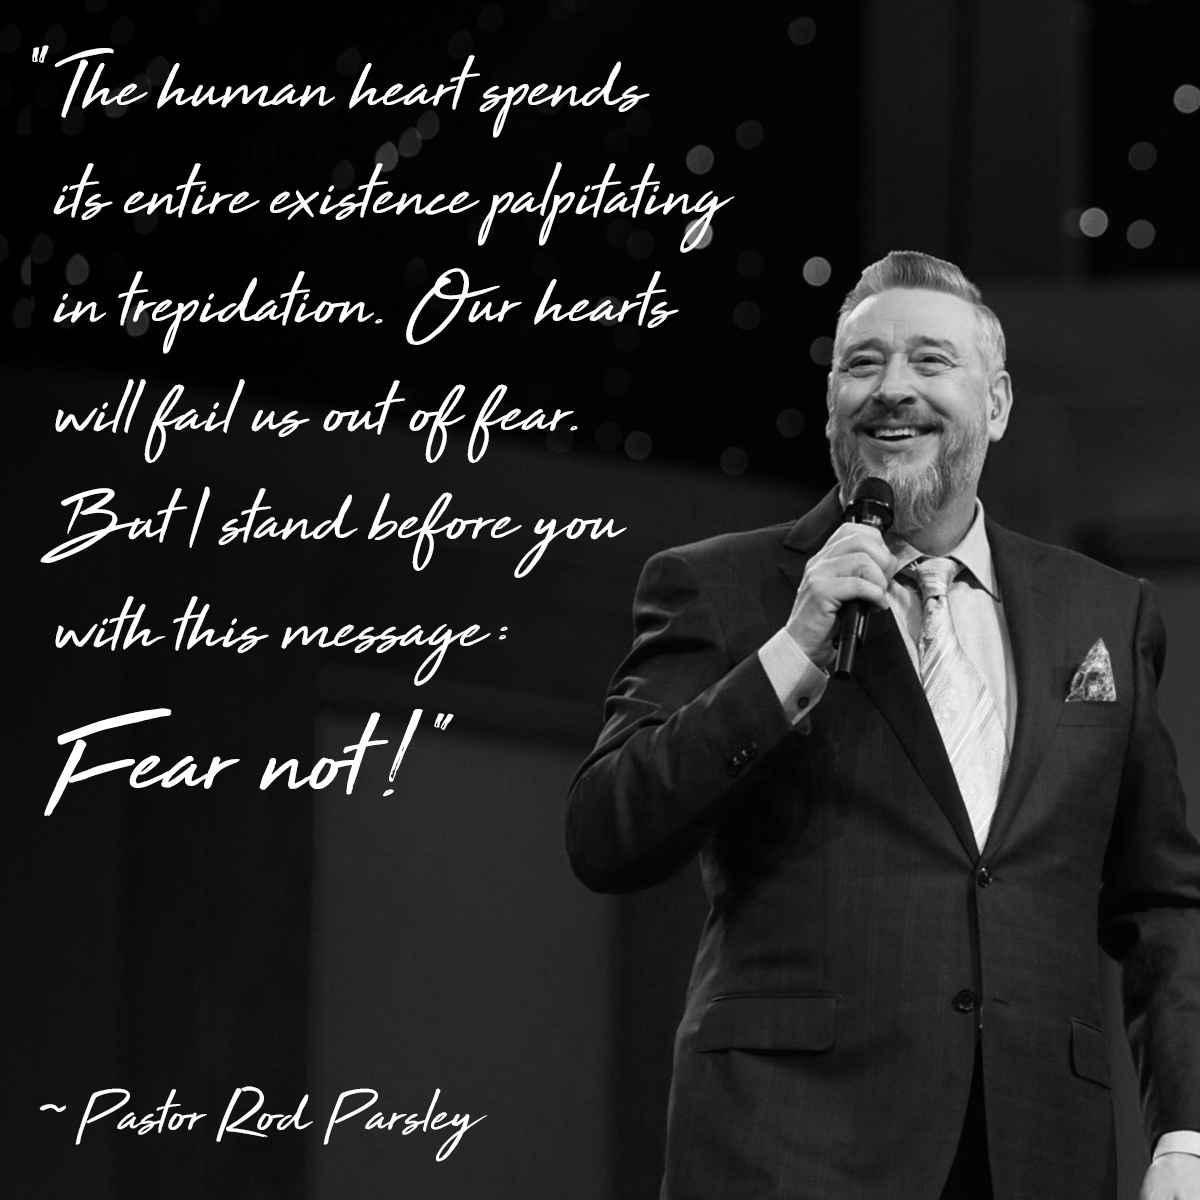 “The human heart spends its entire existence palpitating in trepidation. Our hearts will fail us out of fear. But I stand before you with this message: Fear not!” – Pastor Rod Parsley